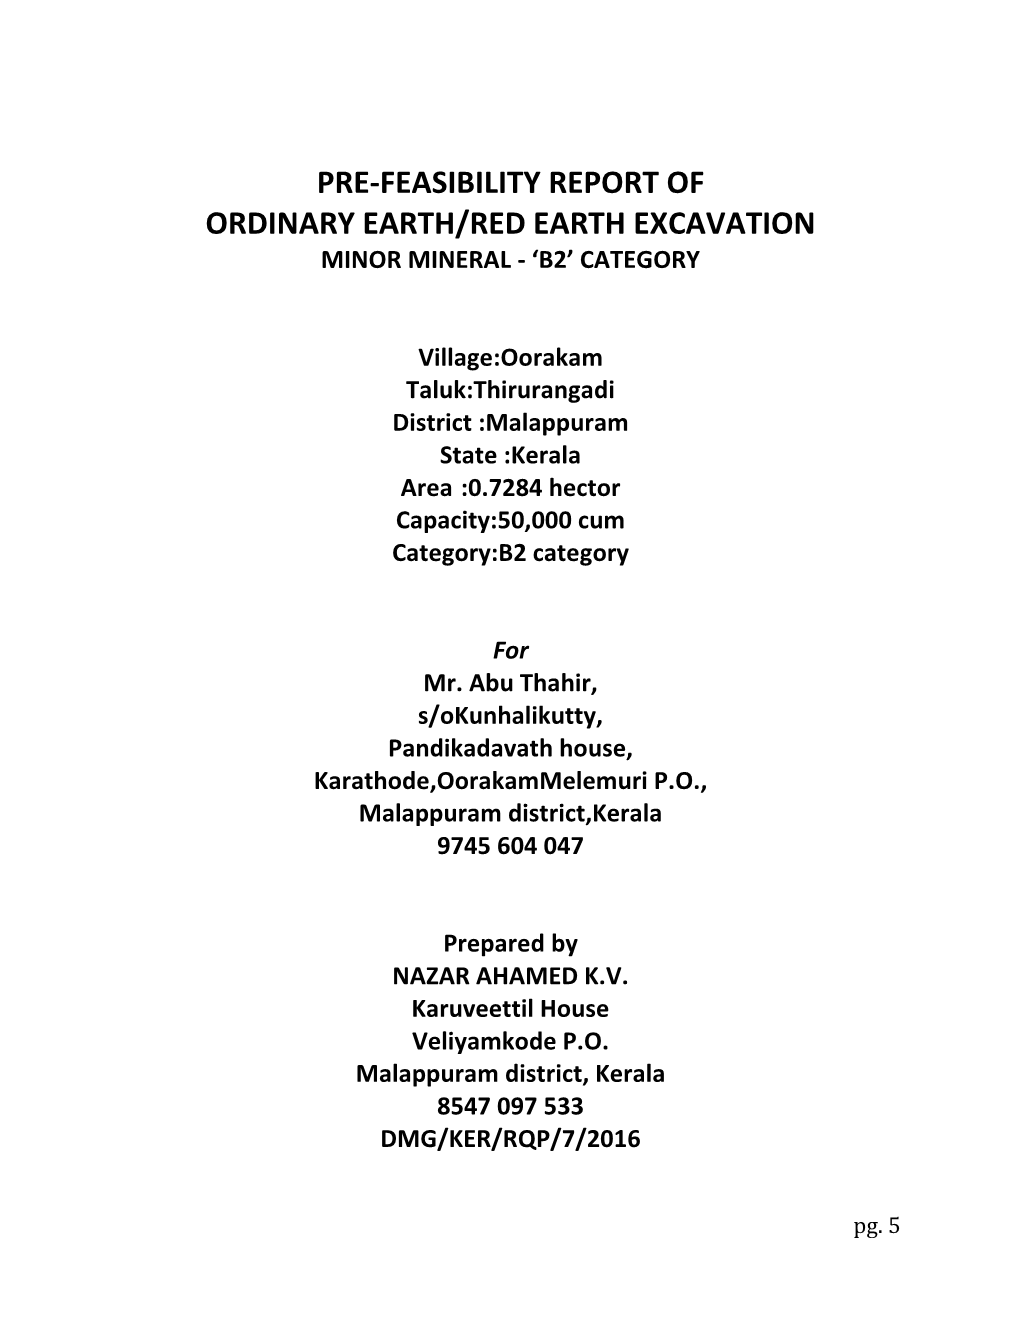 Pre-Feasibility Report of Ordinary Earth/Red Earth Excavation Minor Mineral - ‘B2’ Category